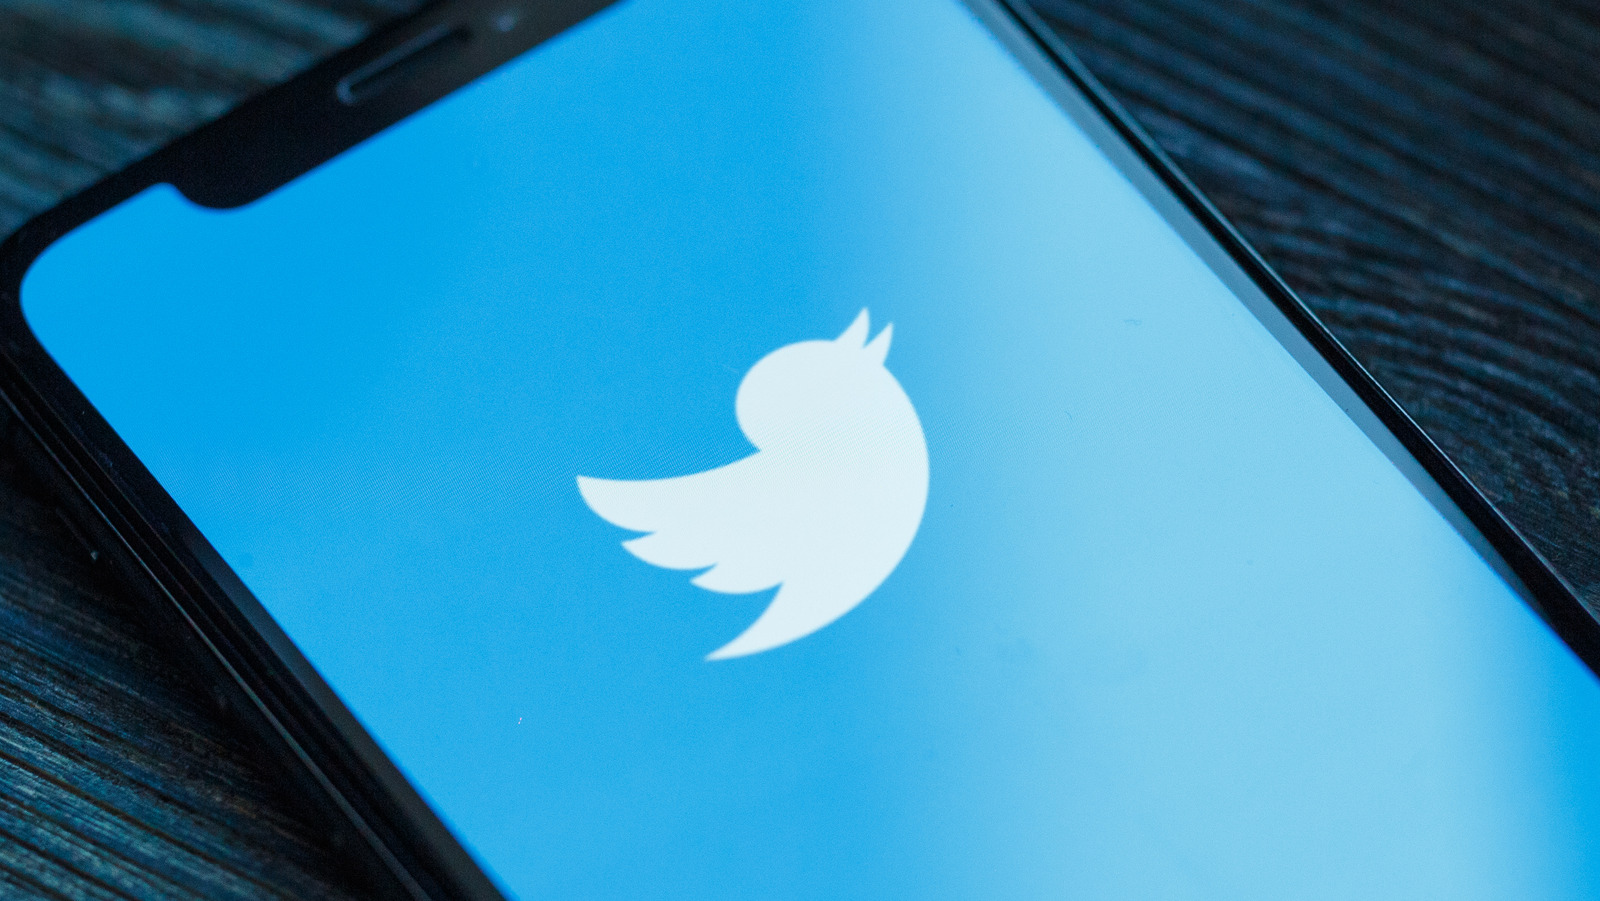 Twitter's Latest Acquisition Will Address Annoying Push Notifications